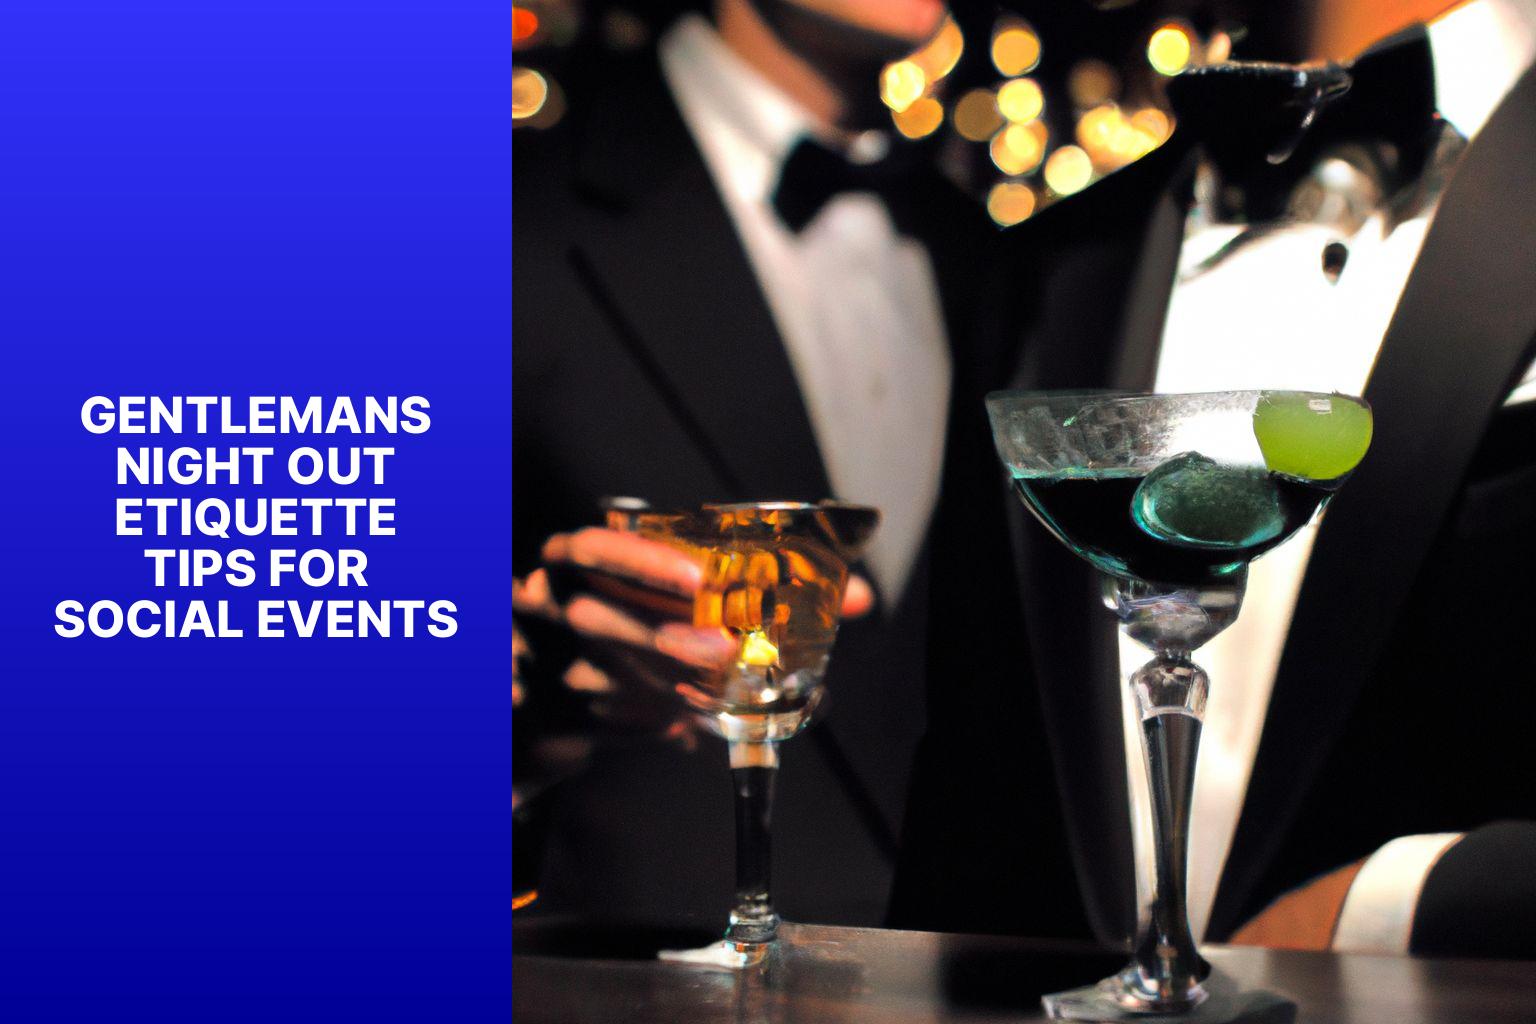 Gentleman’s Night Out: Etiquette Tips for Social Events